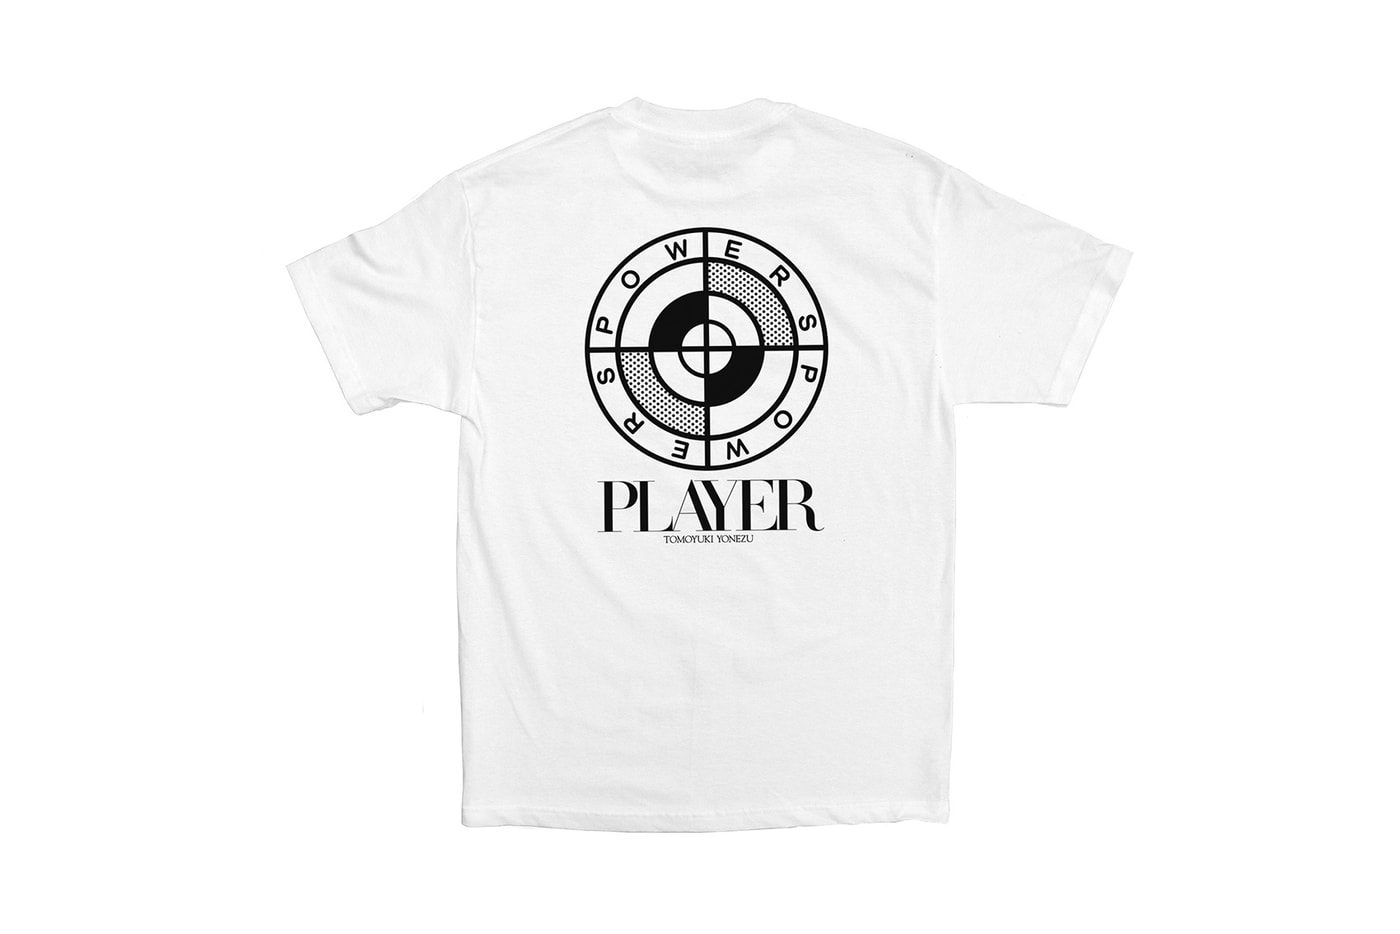 Tomoyuki Yonezu x Powers Supply "PLAYER" T-Shirt capsule collection domicile tokyo japan release date graphics price